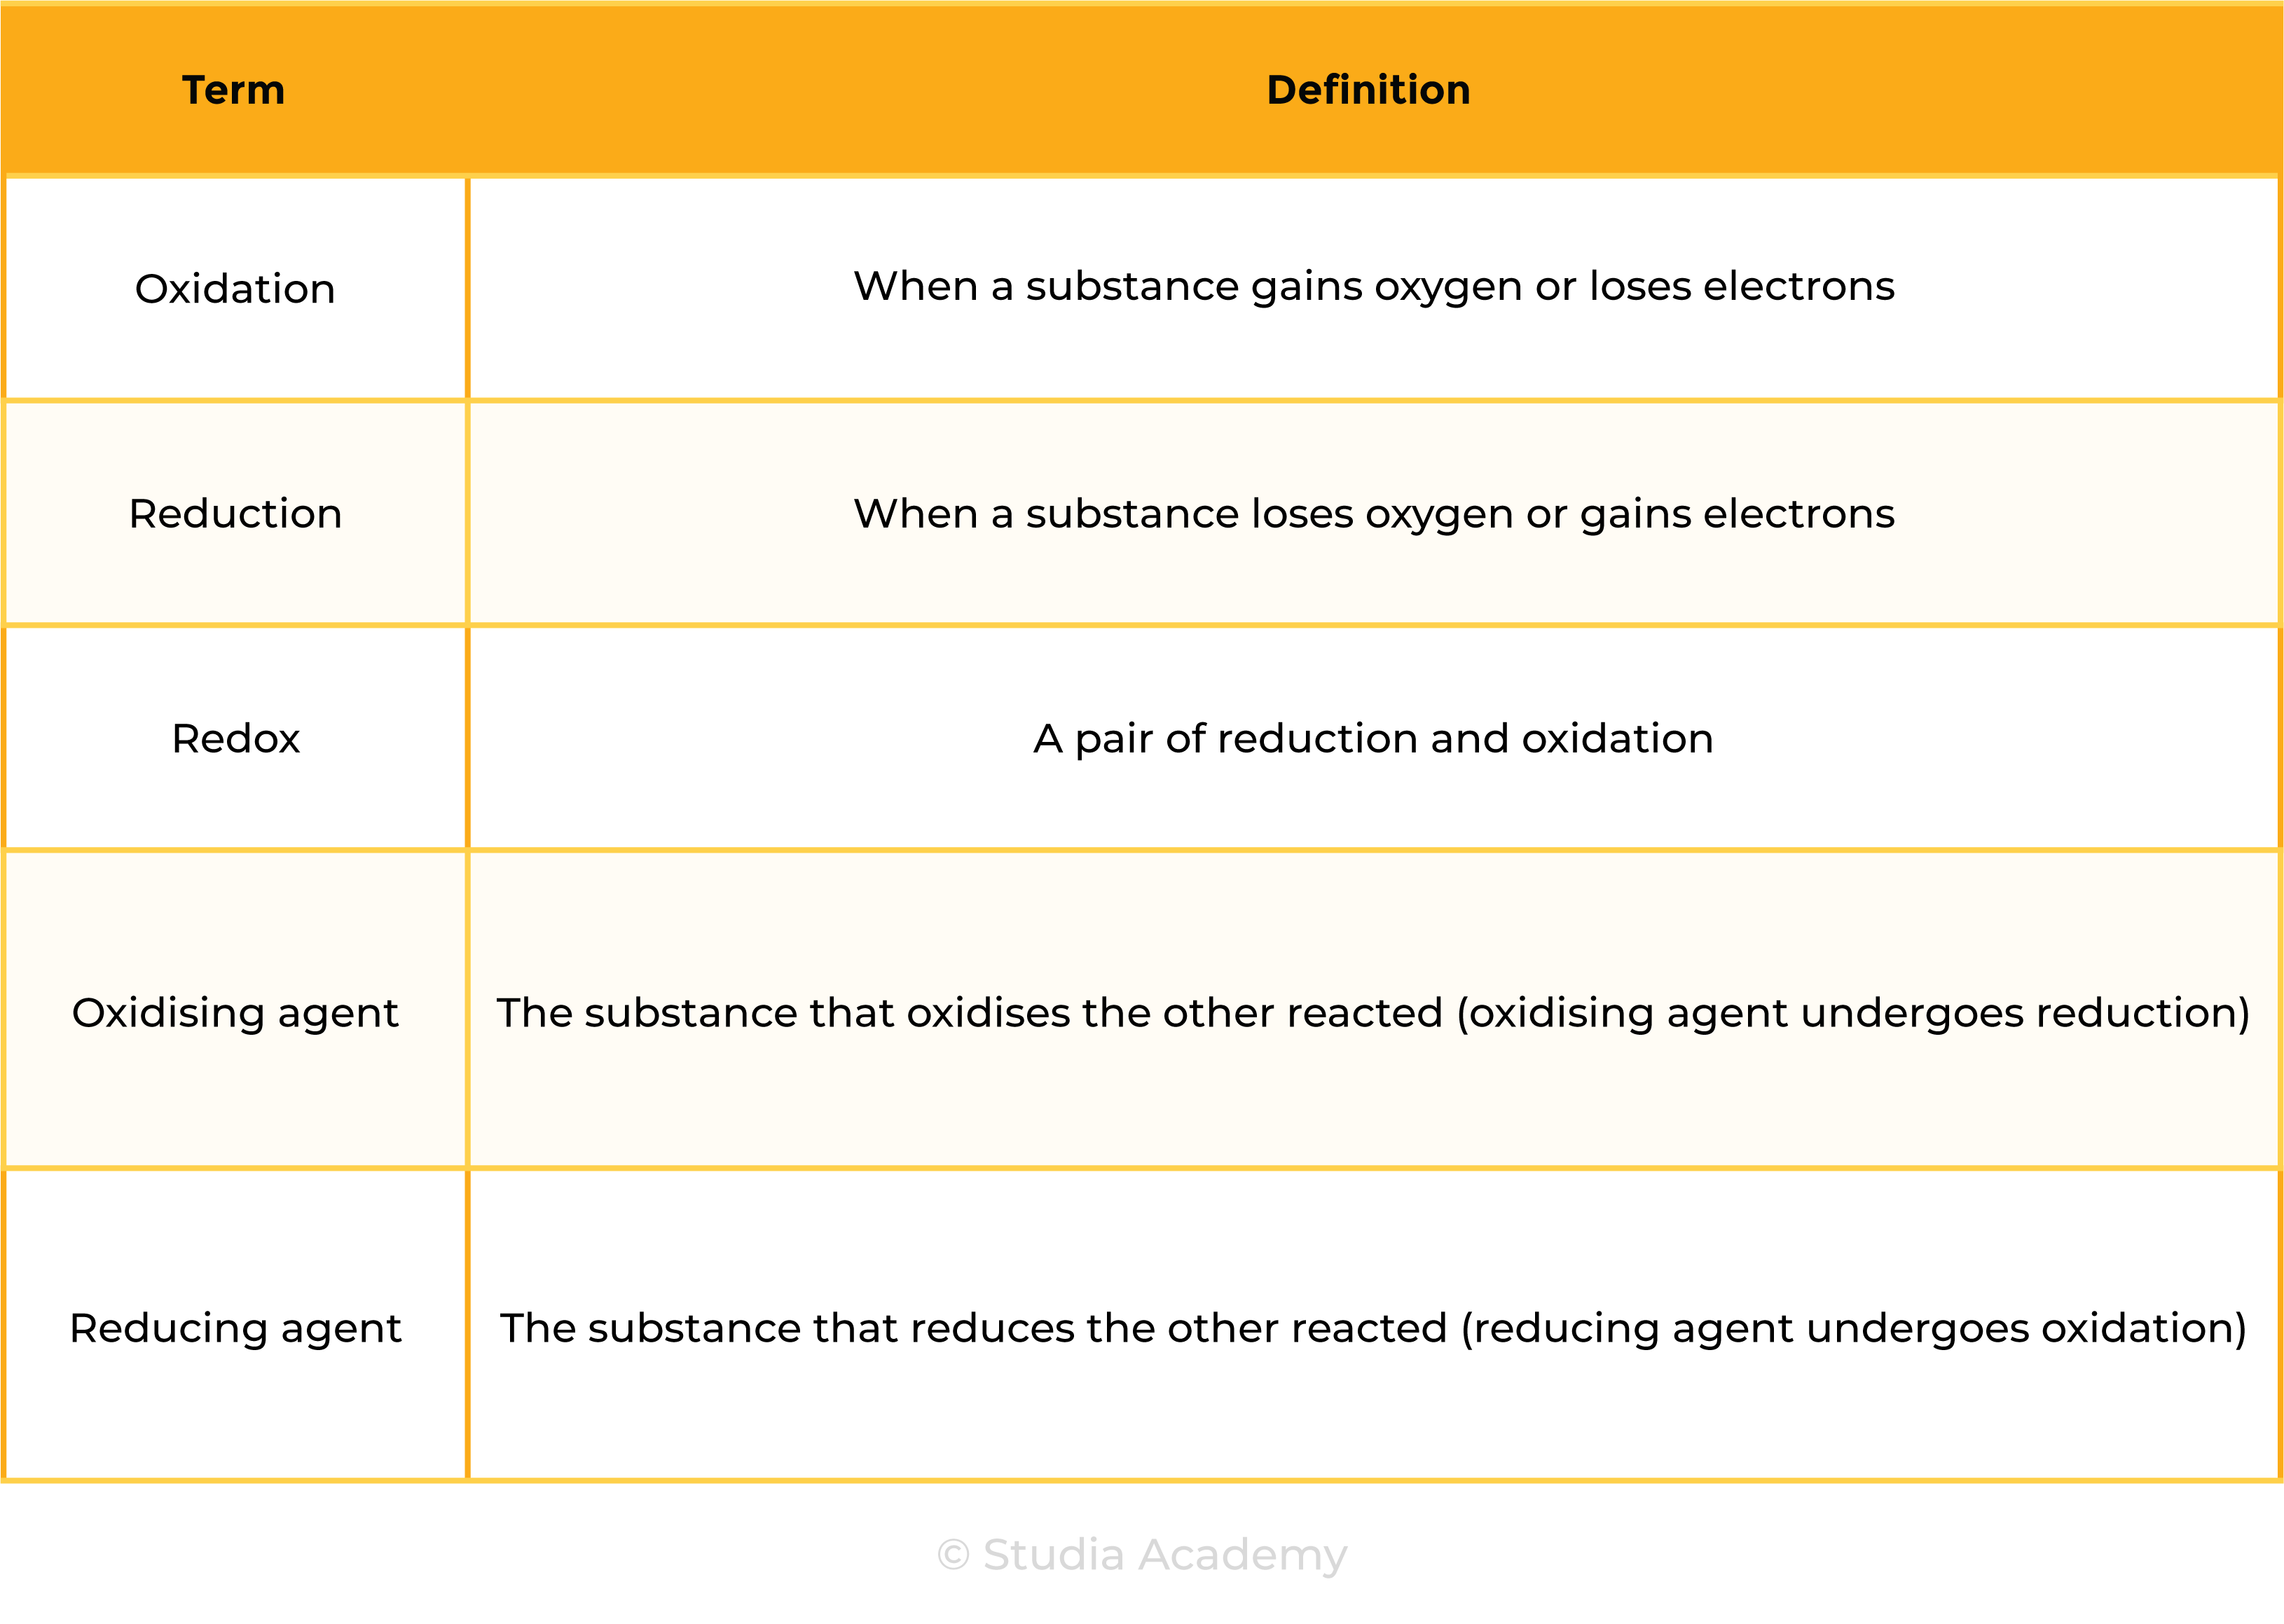 edexcel_igcse_chemistry_topic 13 tables_reactivity series_006_redox reactions key terms